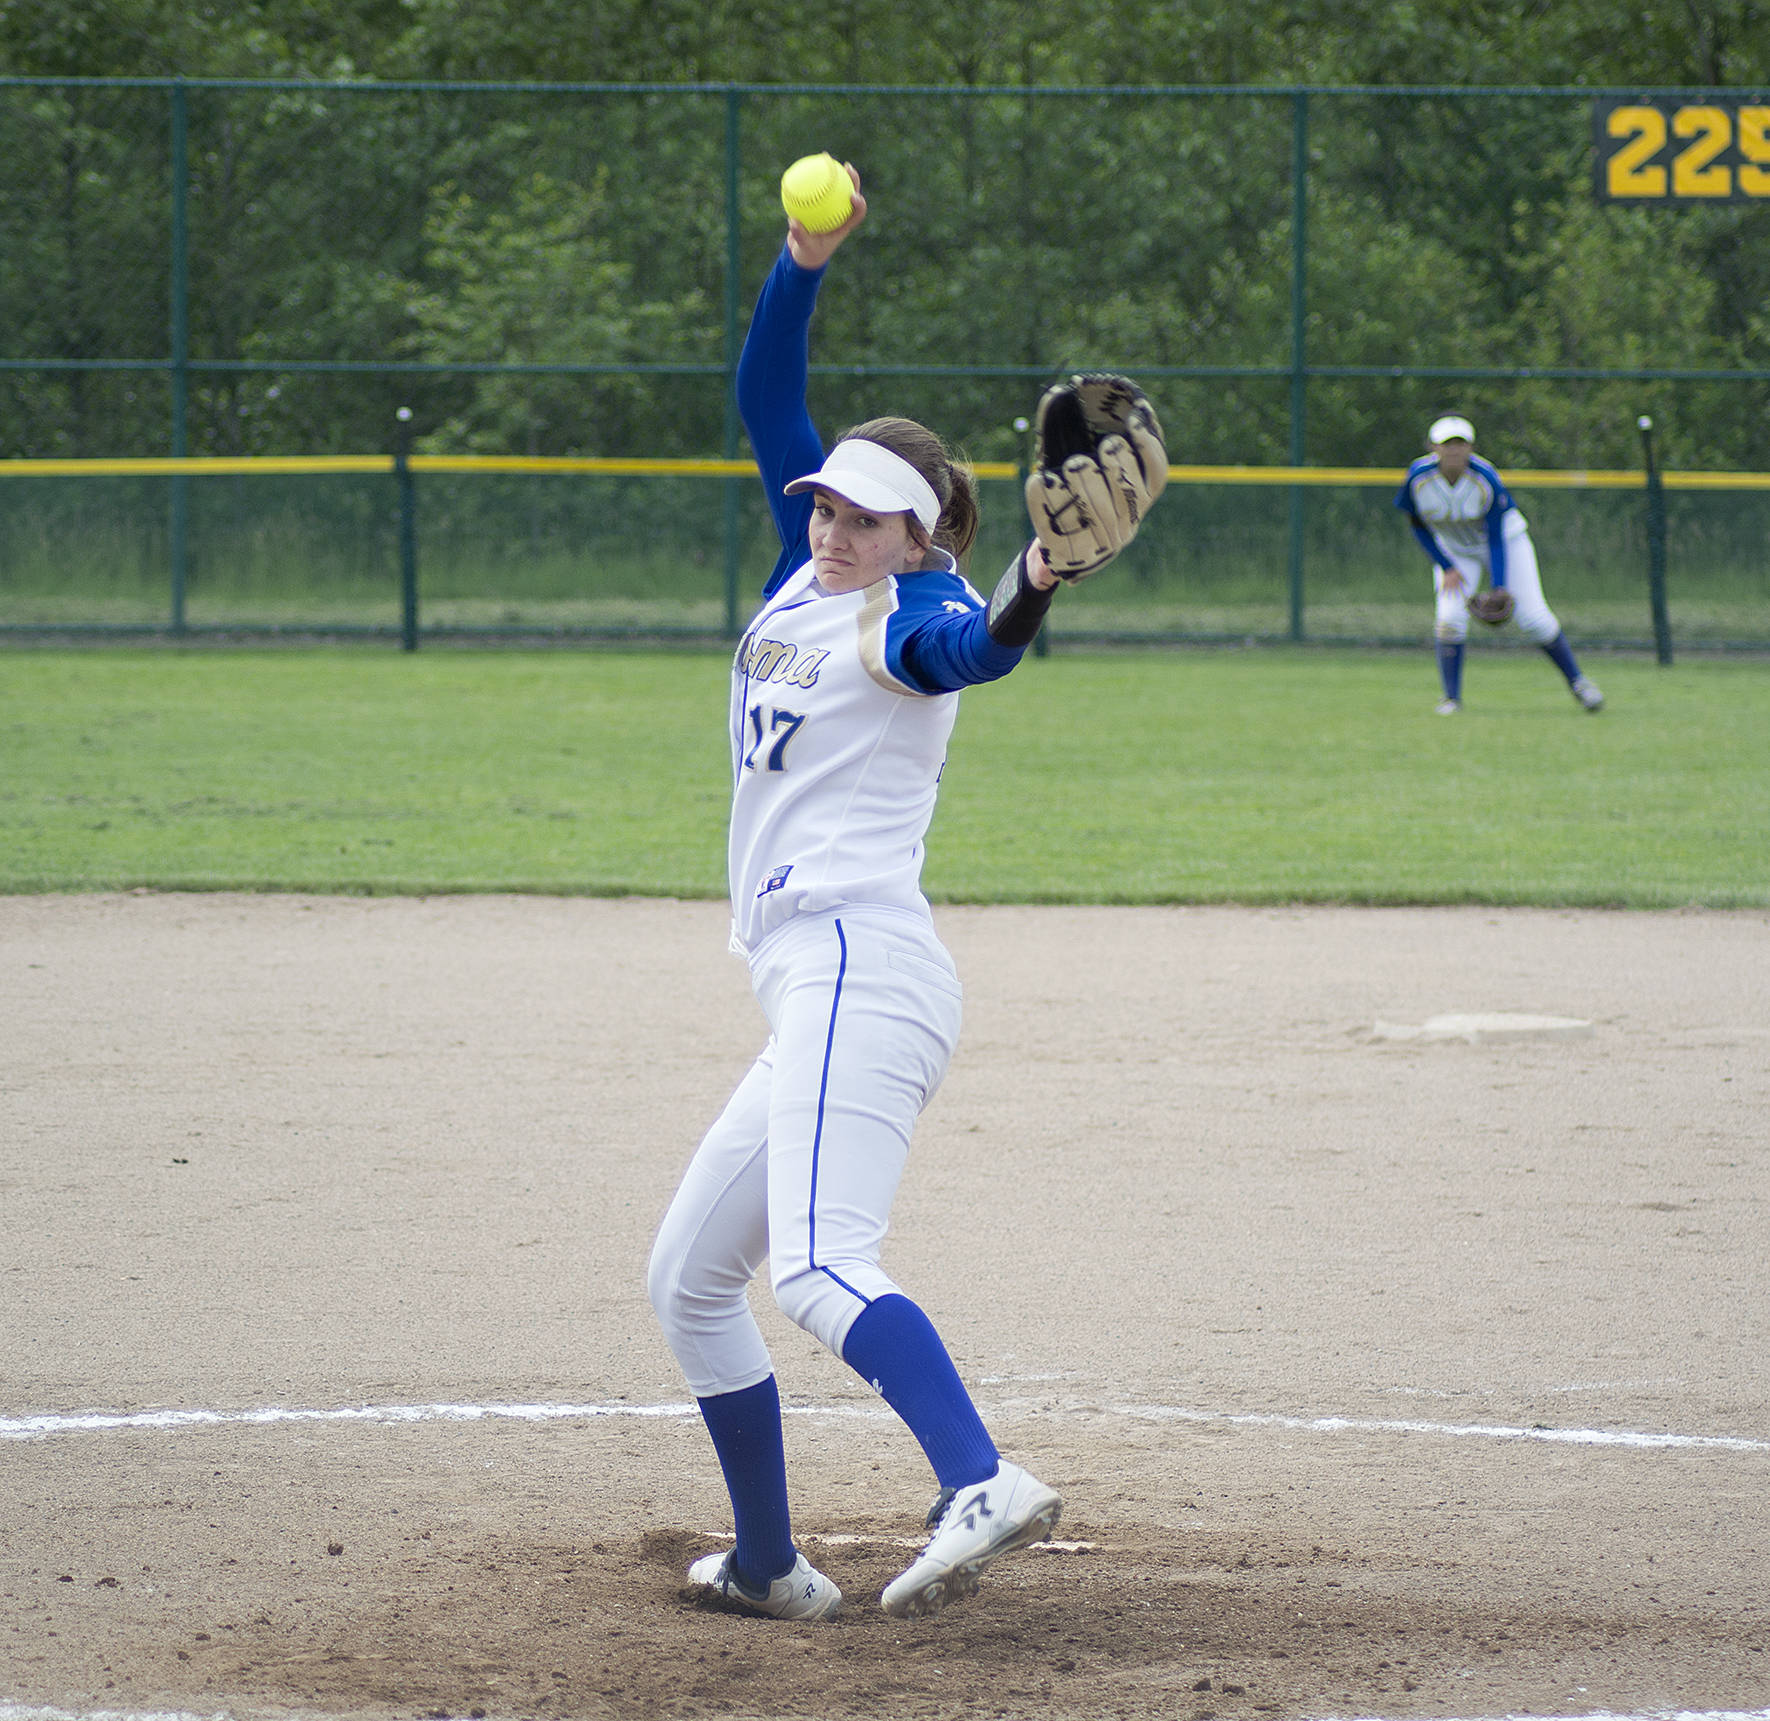 The Tahoma Bears opened district play Friday with a 11-1 win over Todd Beamer. The girls will compete at state beginning today, May 25. Photos by Kayse Angel